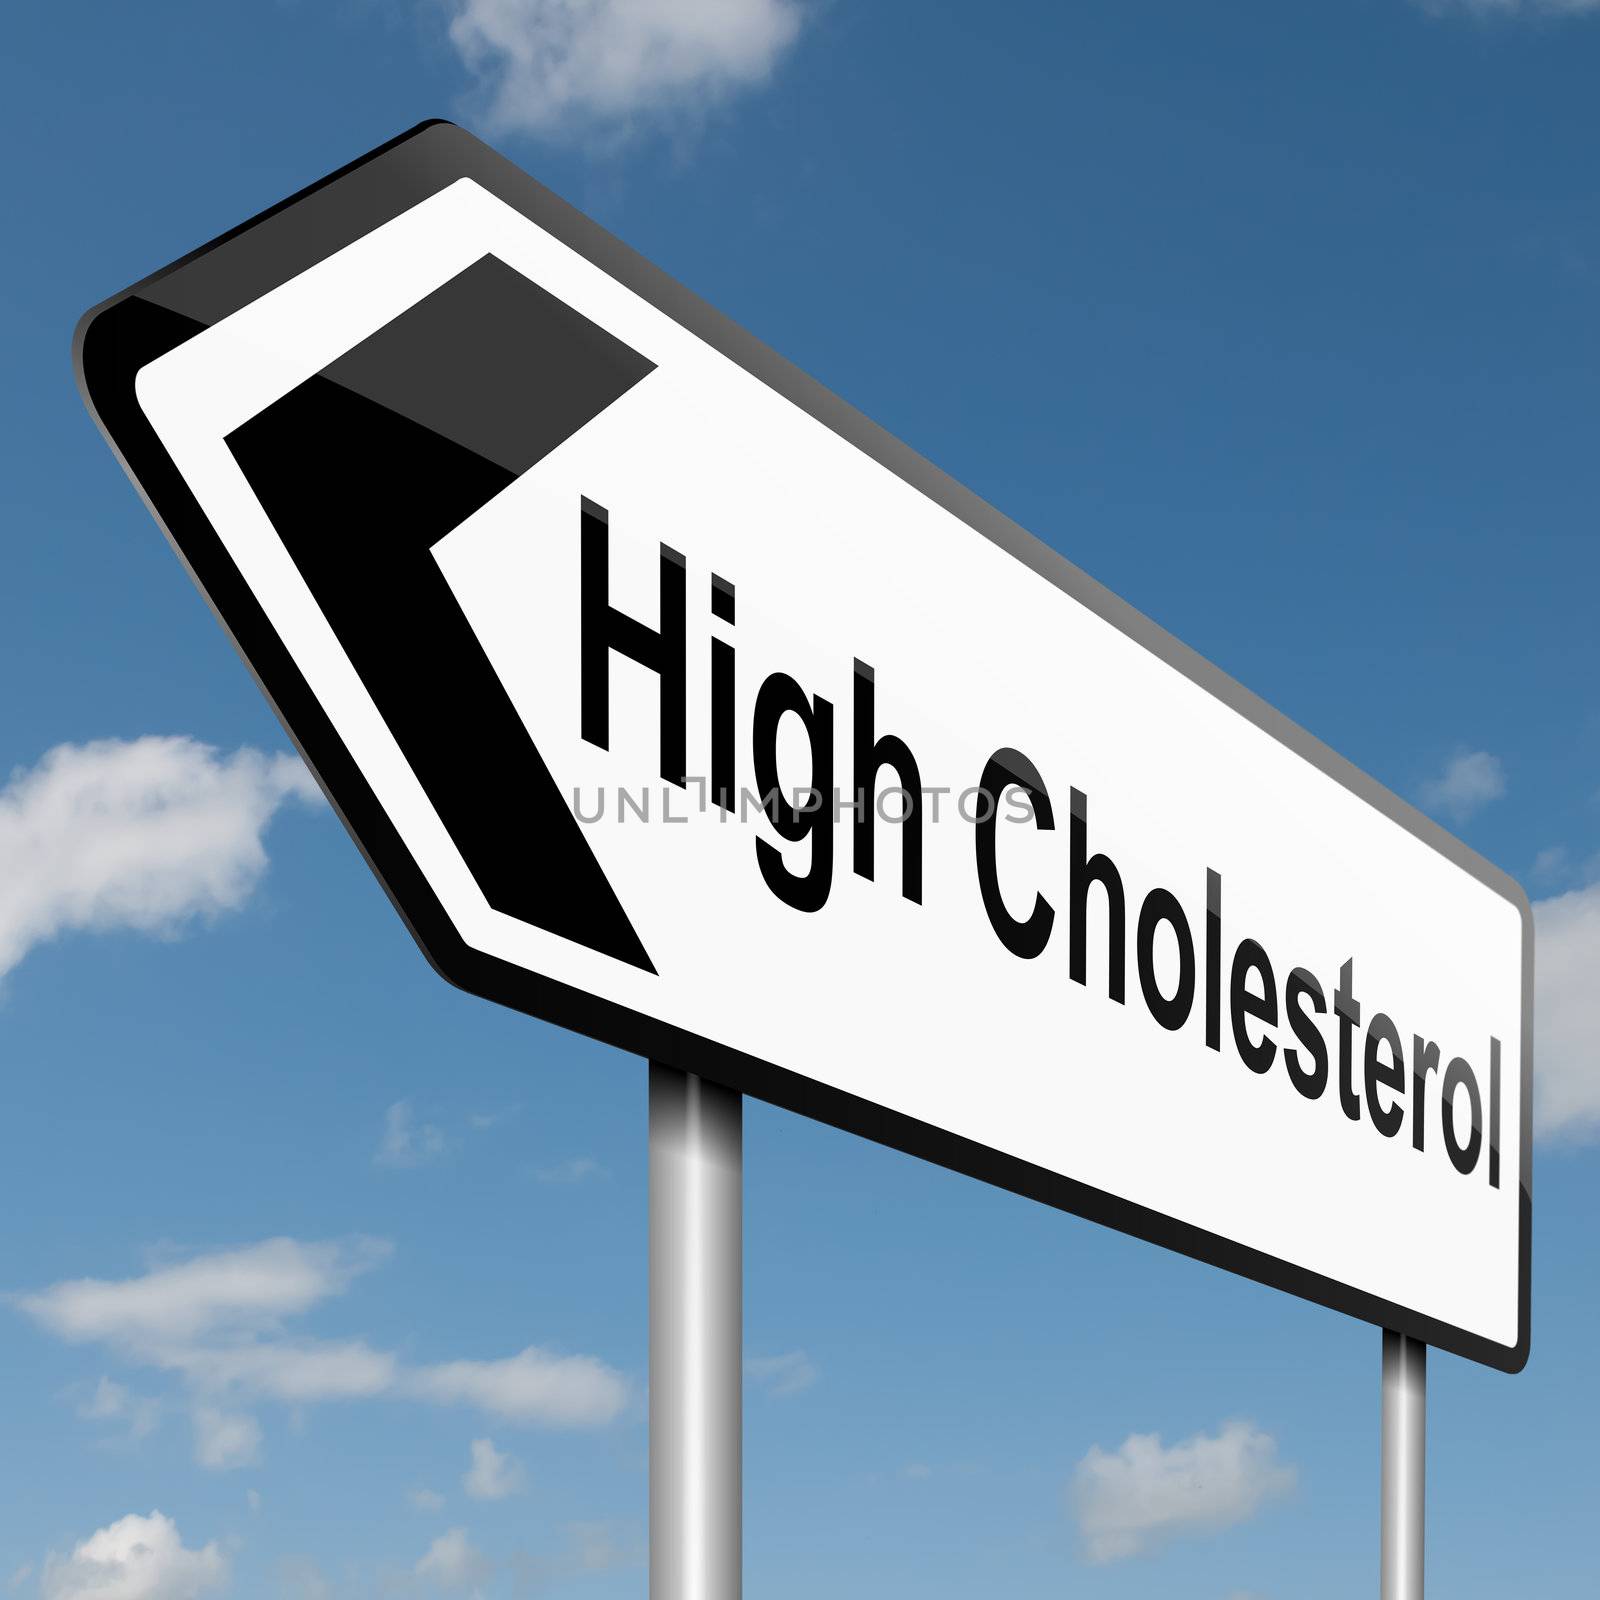 Illustration depicting a road traffic sign with a Cholesterol concept. Blue sky background.